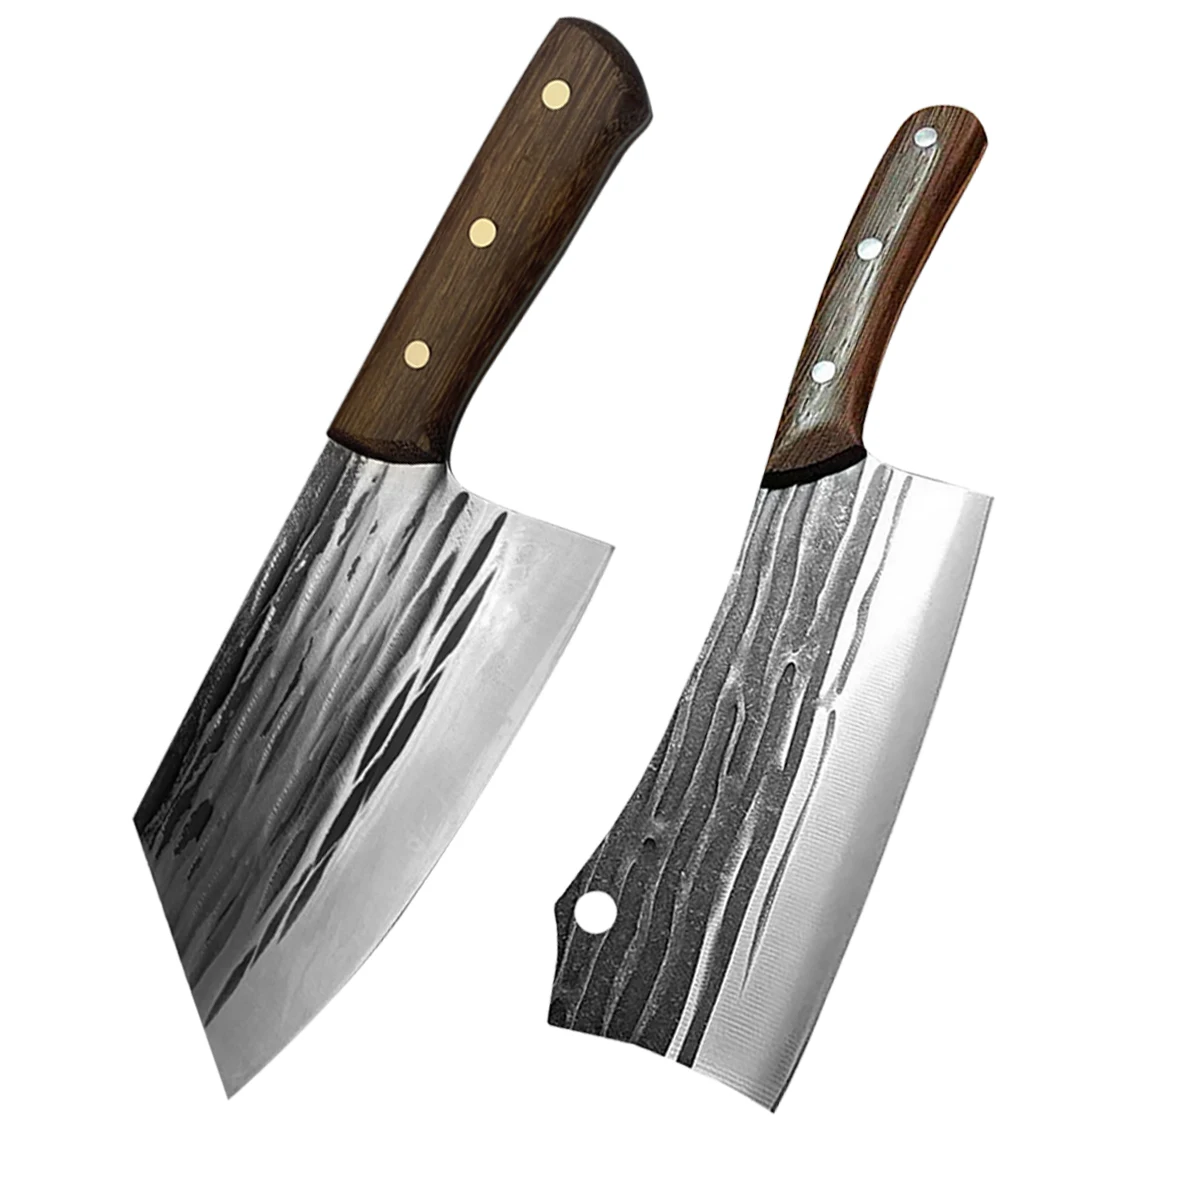 Stainless Steel kitchen knives Chef Knife Hand-forged Butcher Knife Meat Vegetables Slicing Cleaver High Hardness Utility knife 